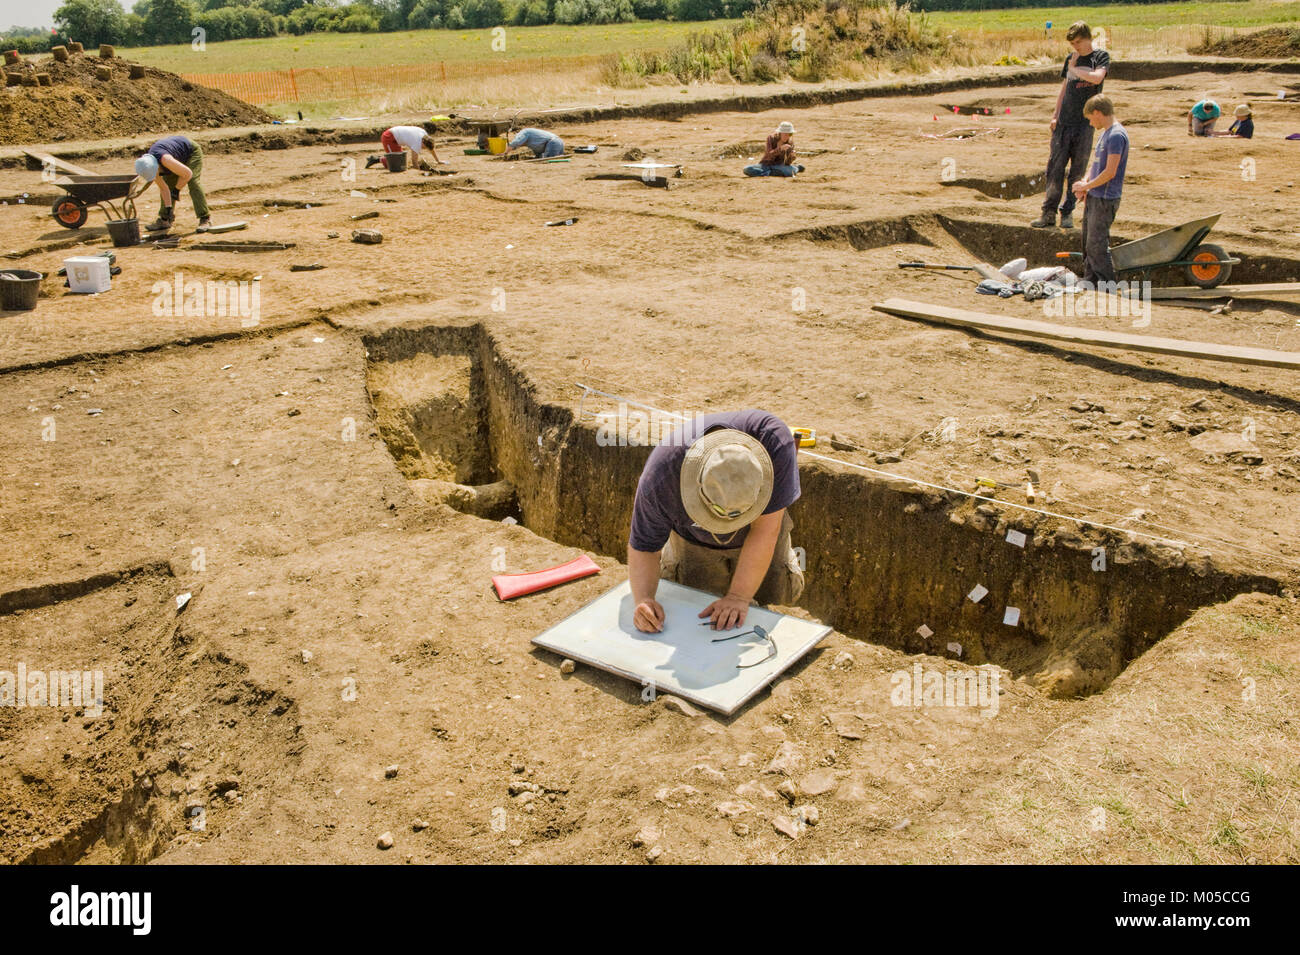 Archaeological excavation of Iron-Age site Stock Photo